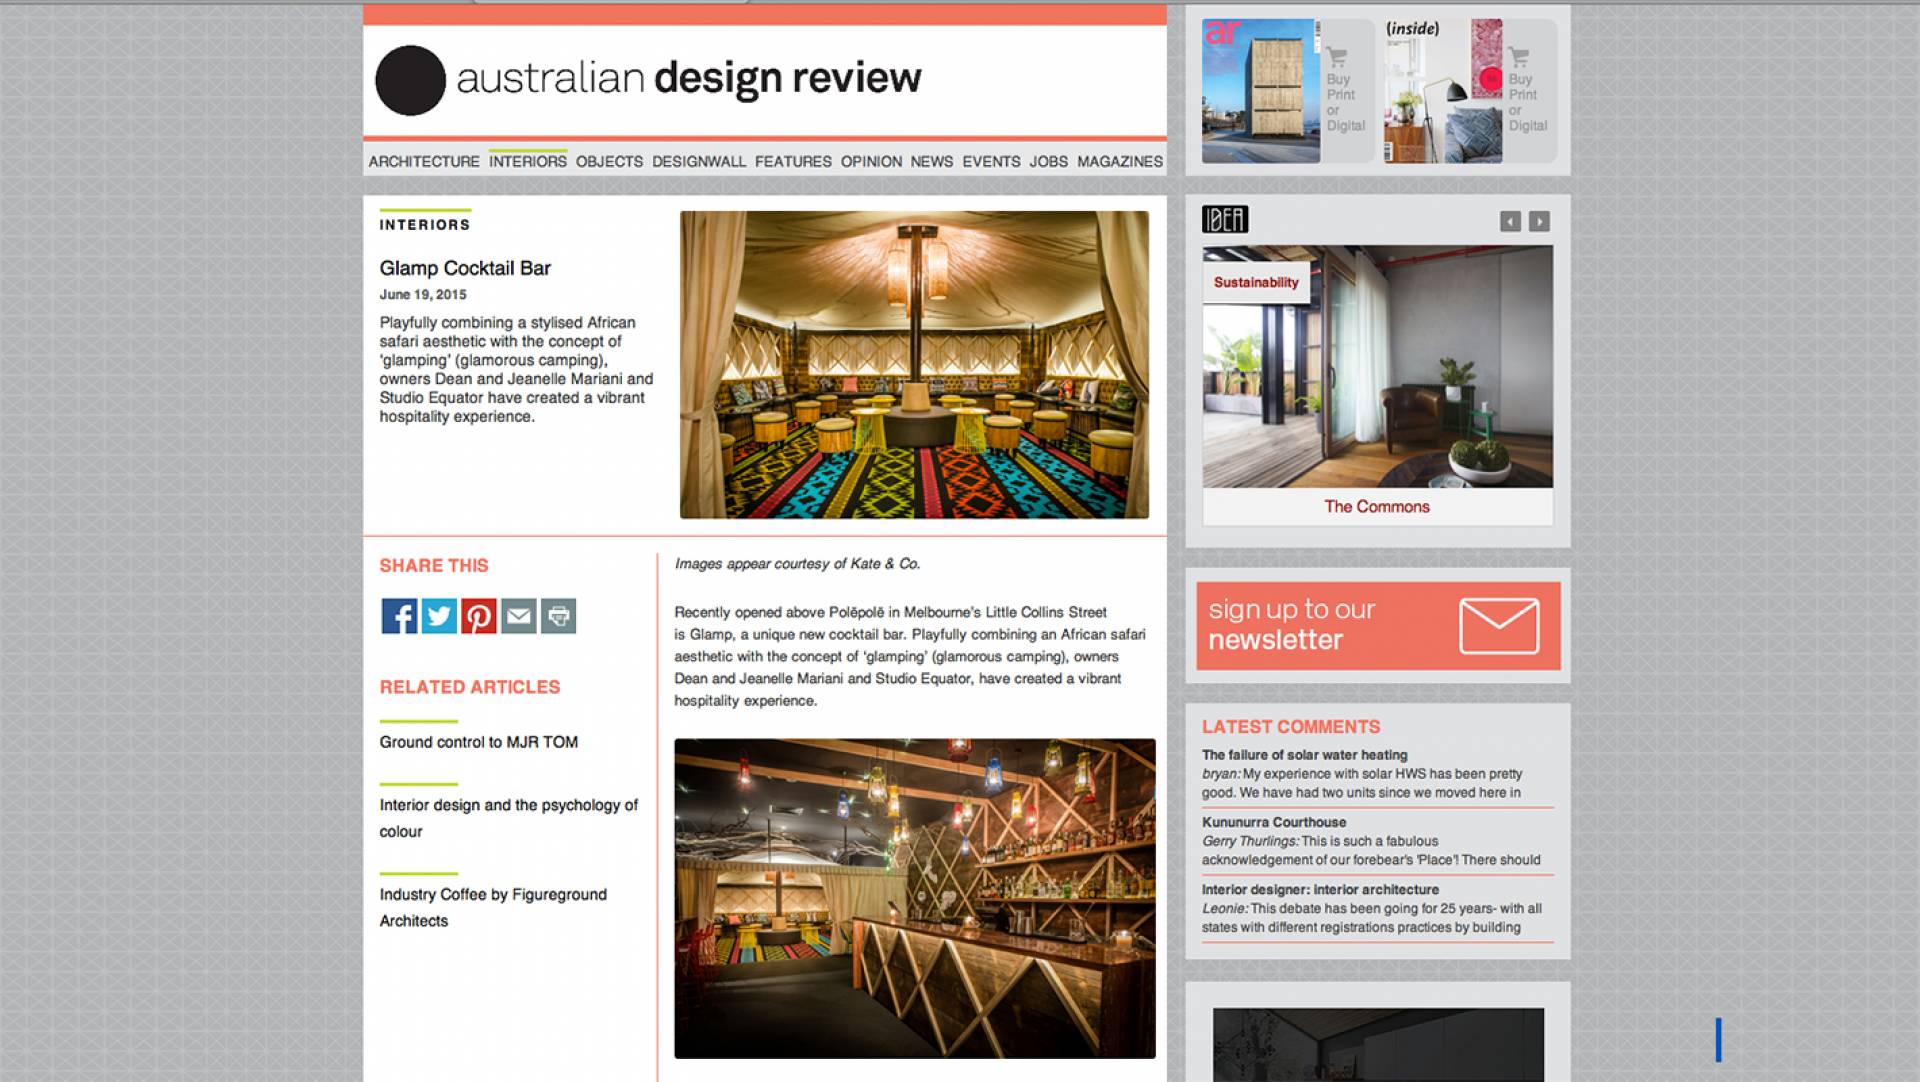 Australian Design Review Publishes Glamp Cocktail Bar Interiors